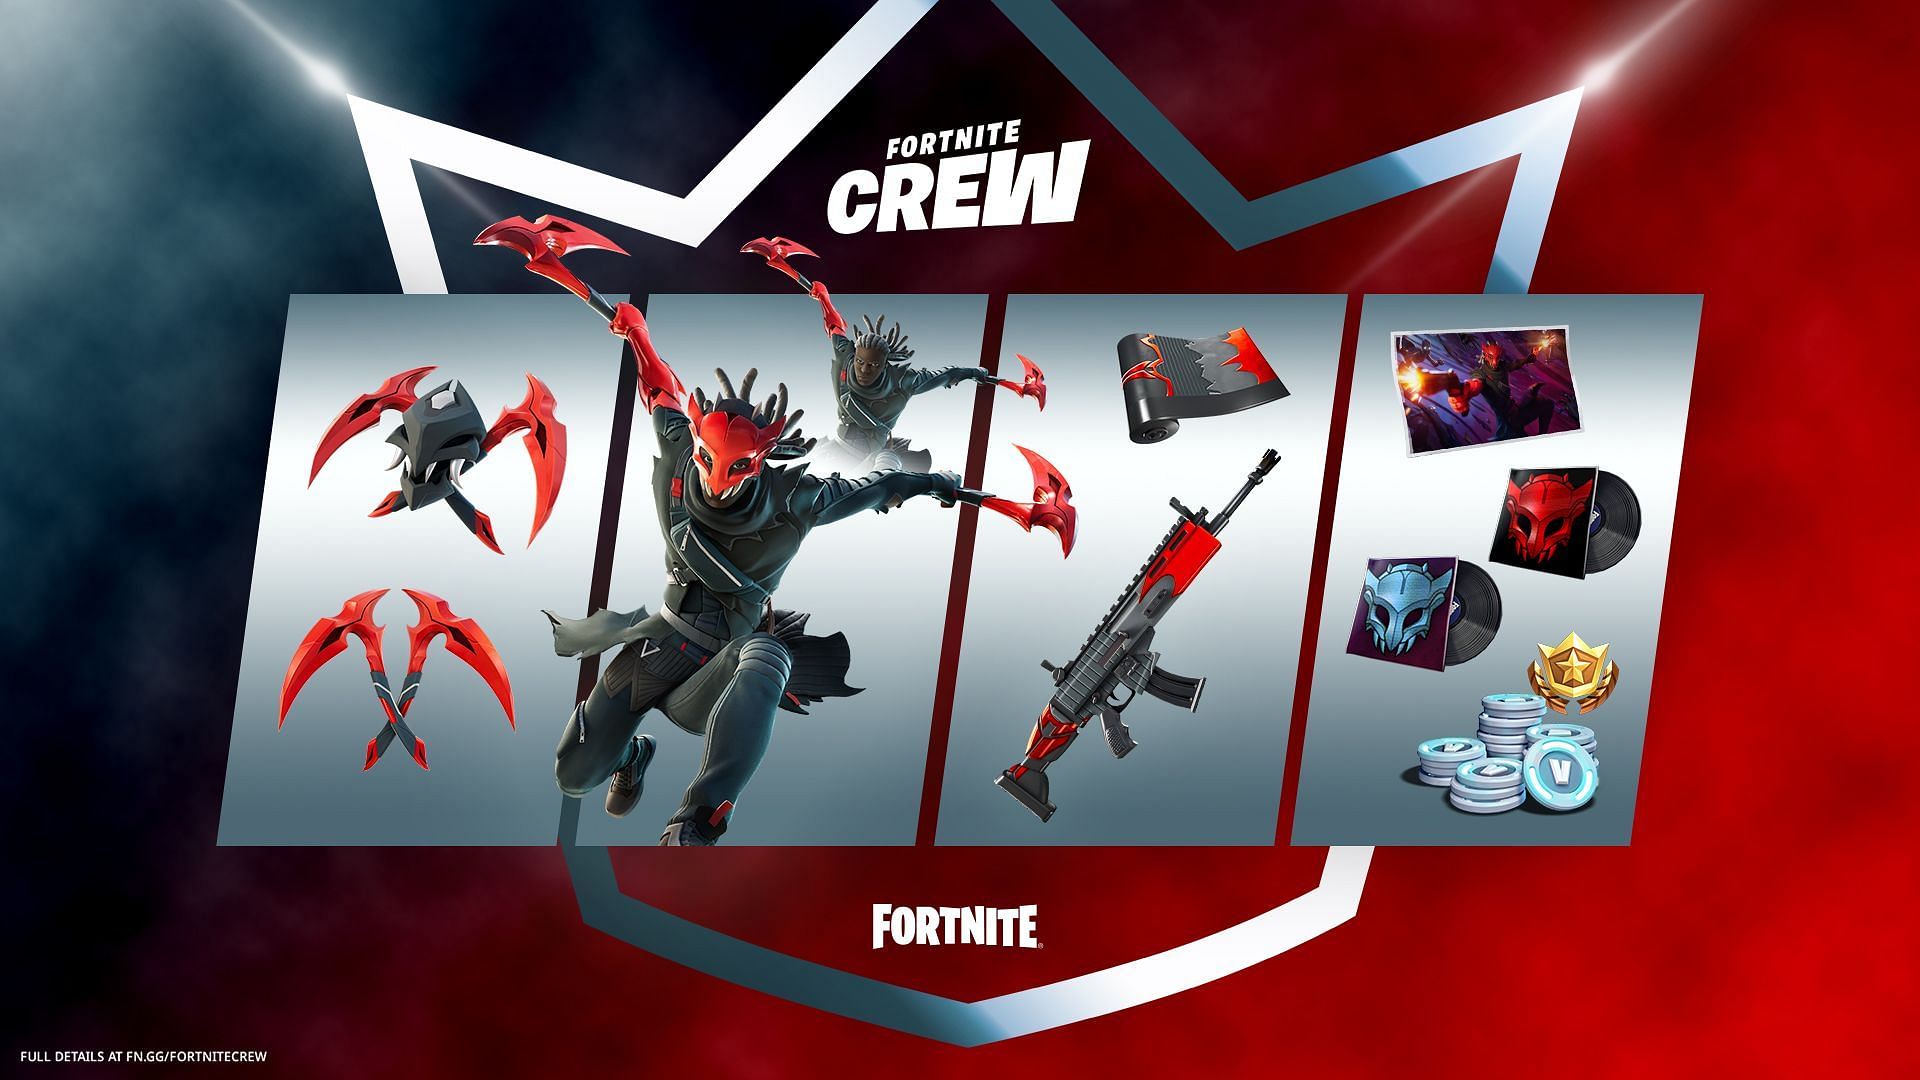 The next update will bring two more items for Fortnite Crew subscribers (Image via Epic Games)